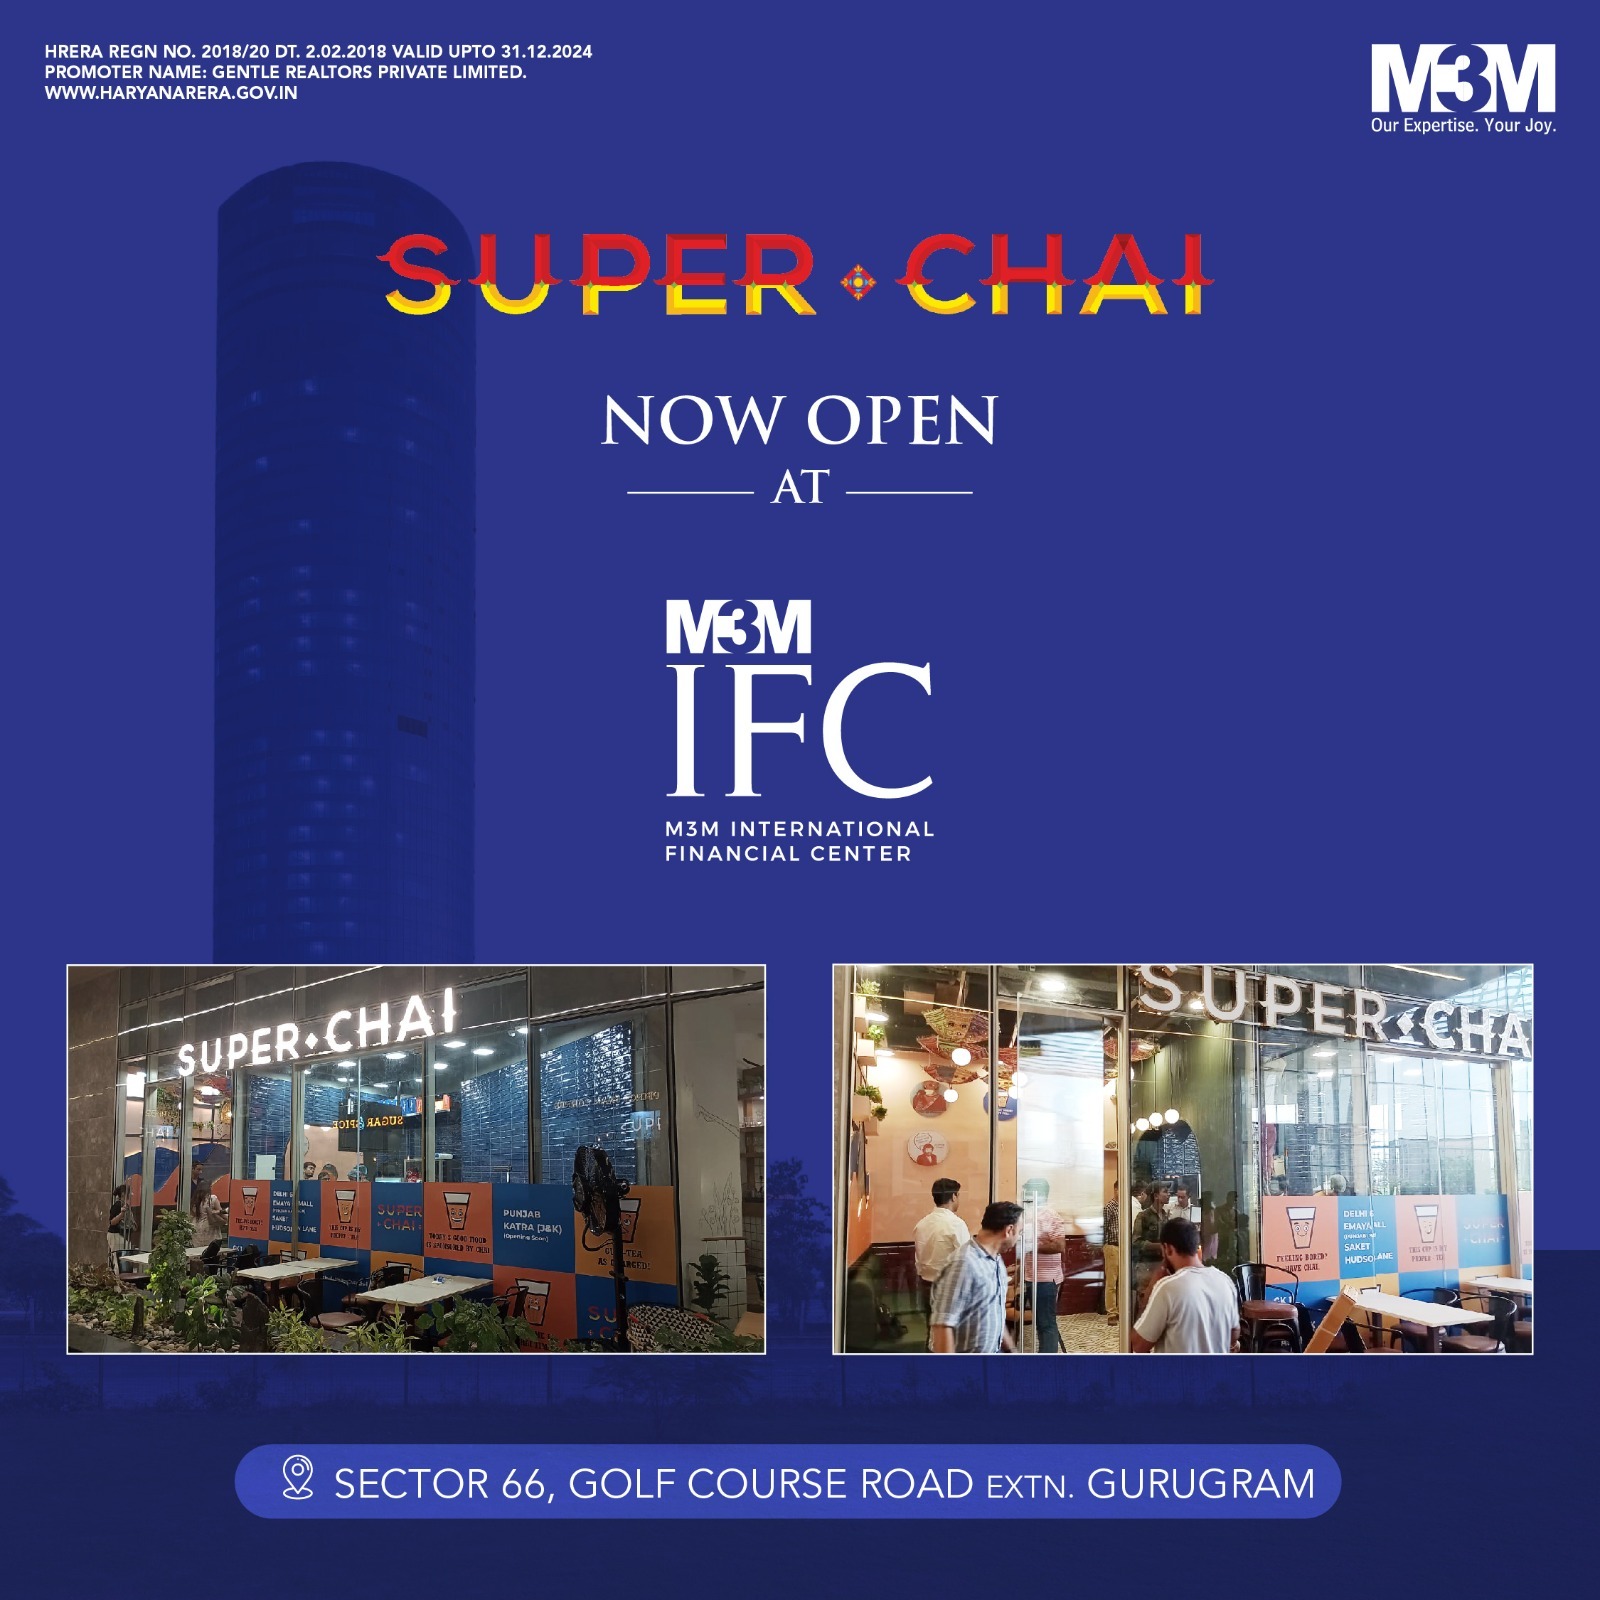 Super Chai is now open at M3M International Financial Centre, Gurgaon Update